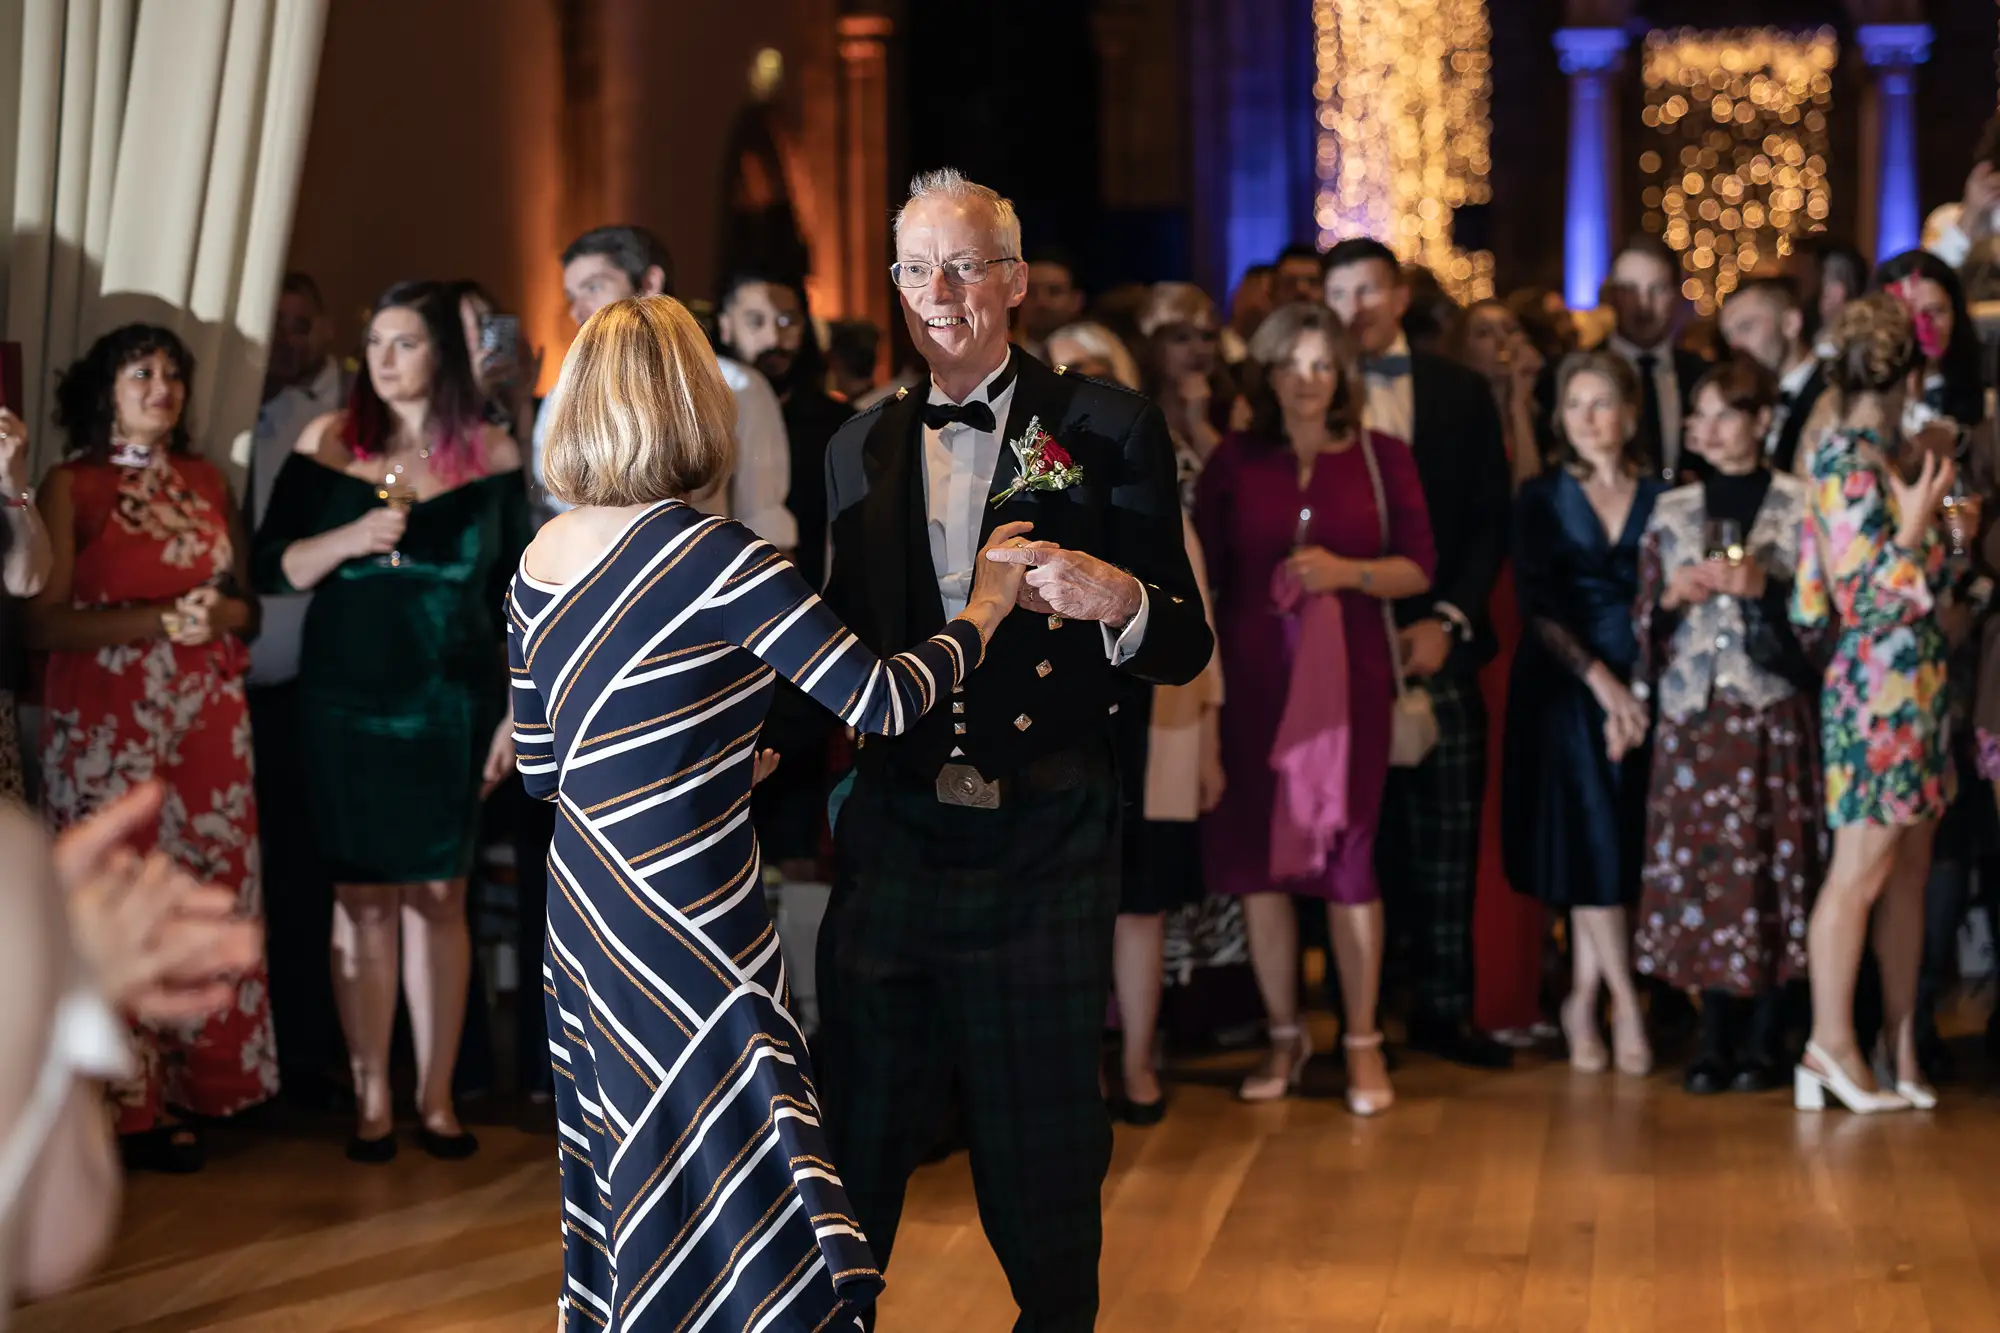 An elderly couple dances joyfully at a formal event, surrounded by onlookers in a warmly lit hall. the man wears a traditional kilt, and the woman dons a striped dress.